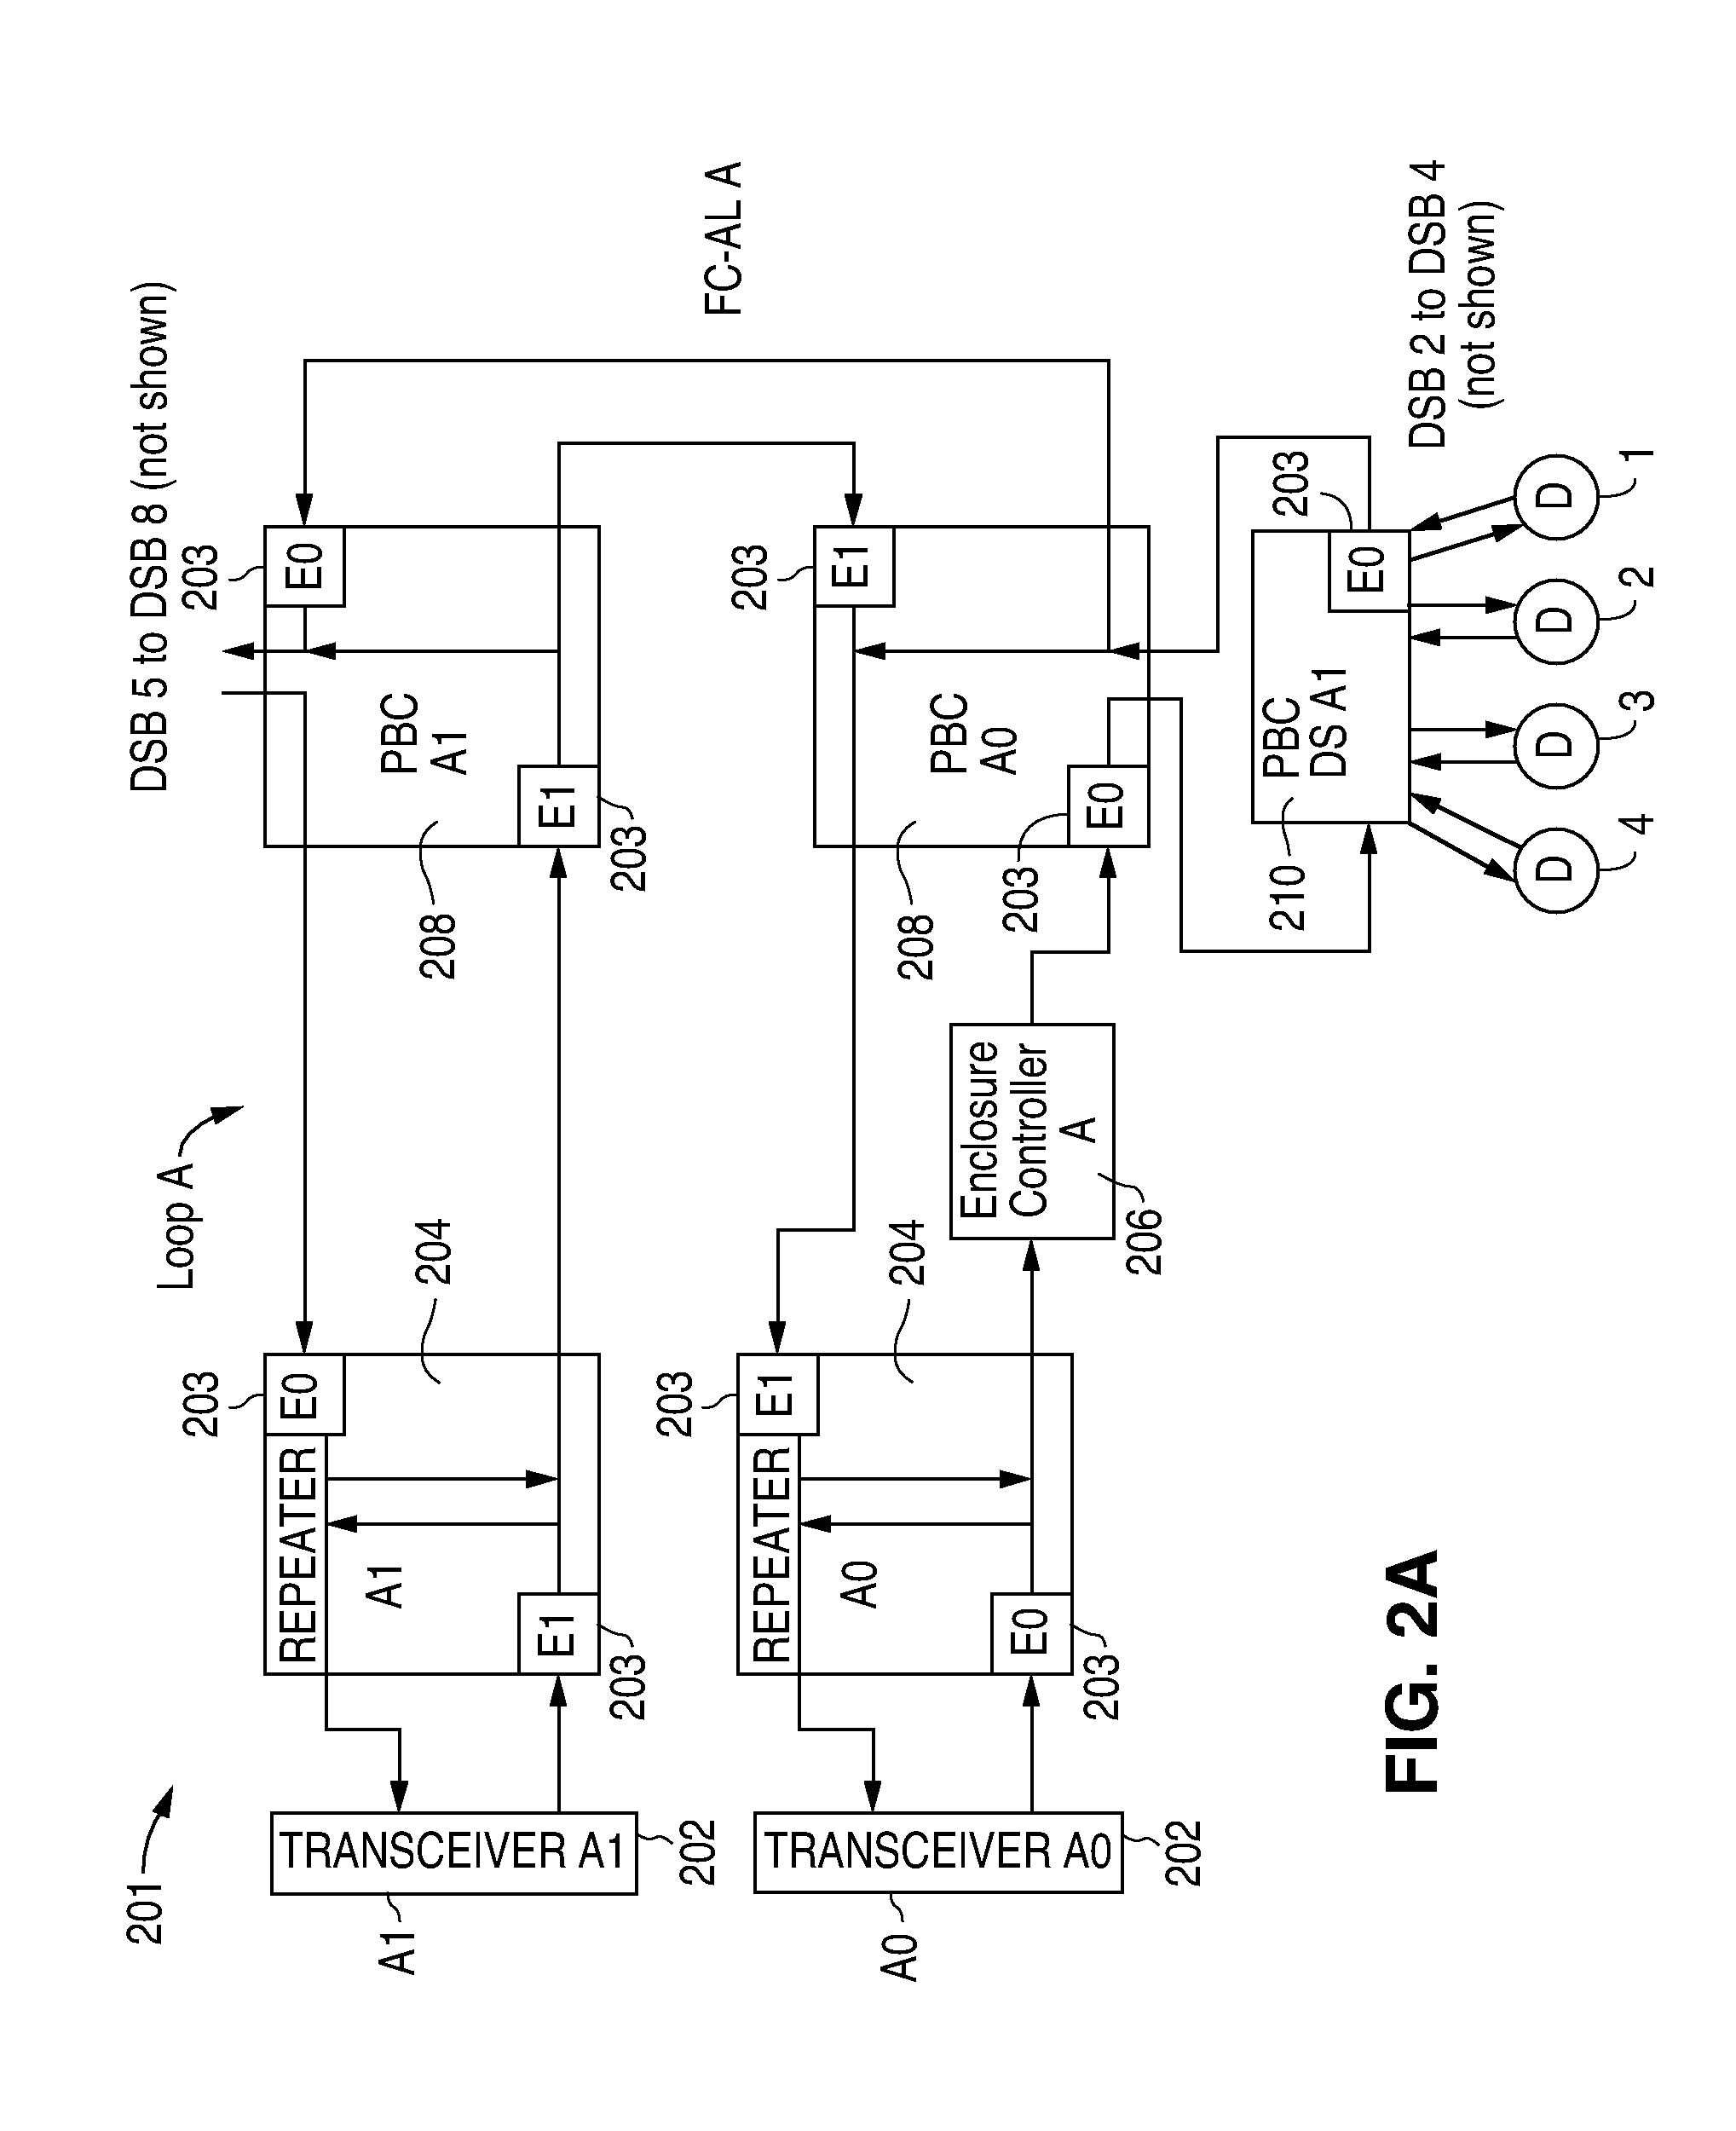 Isolation of I2C buses in a multiple power domain environment using switches